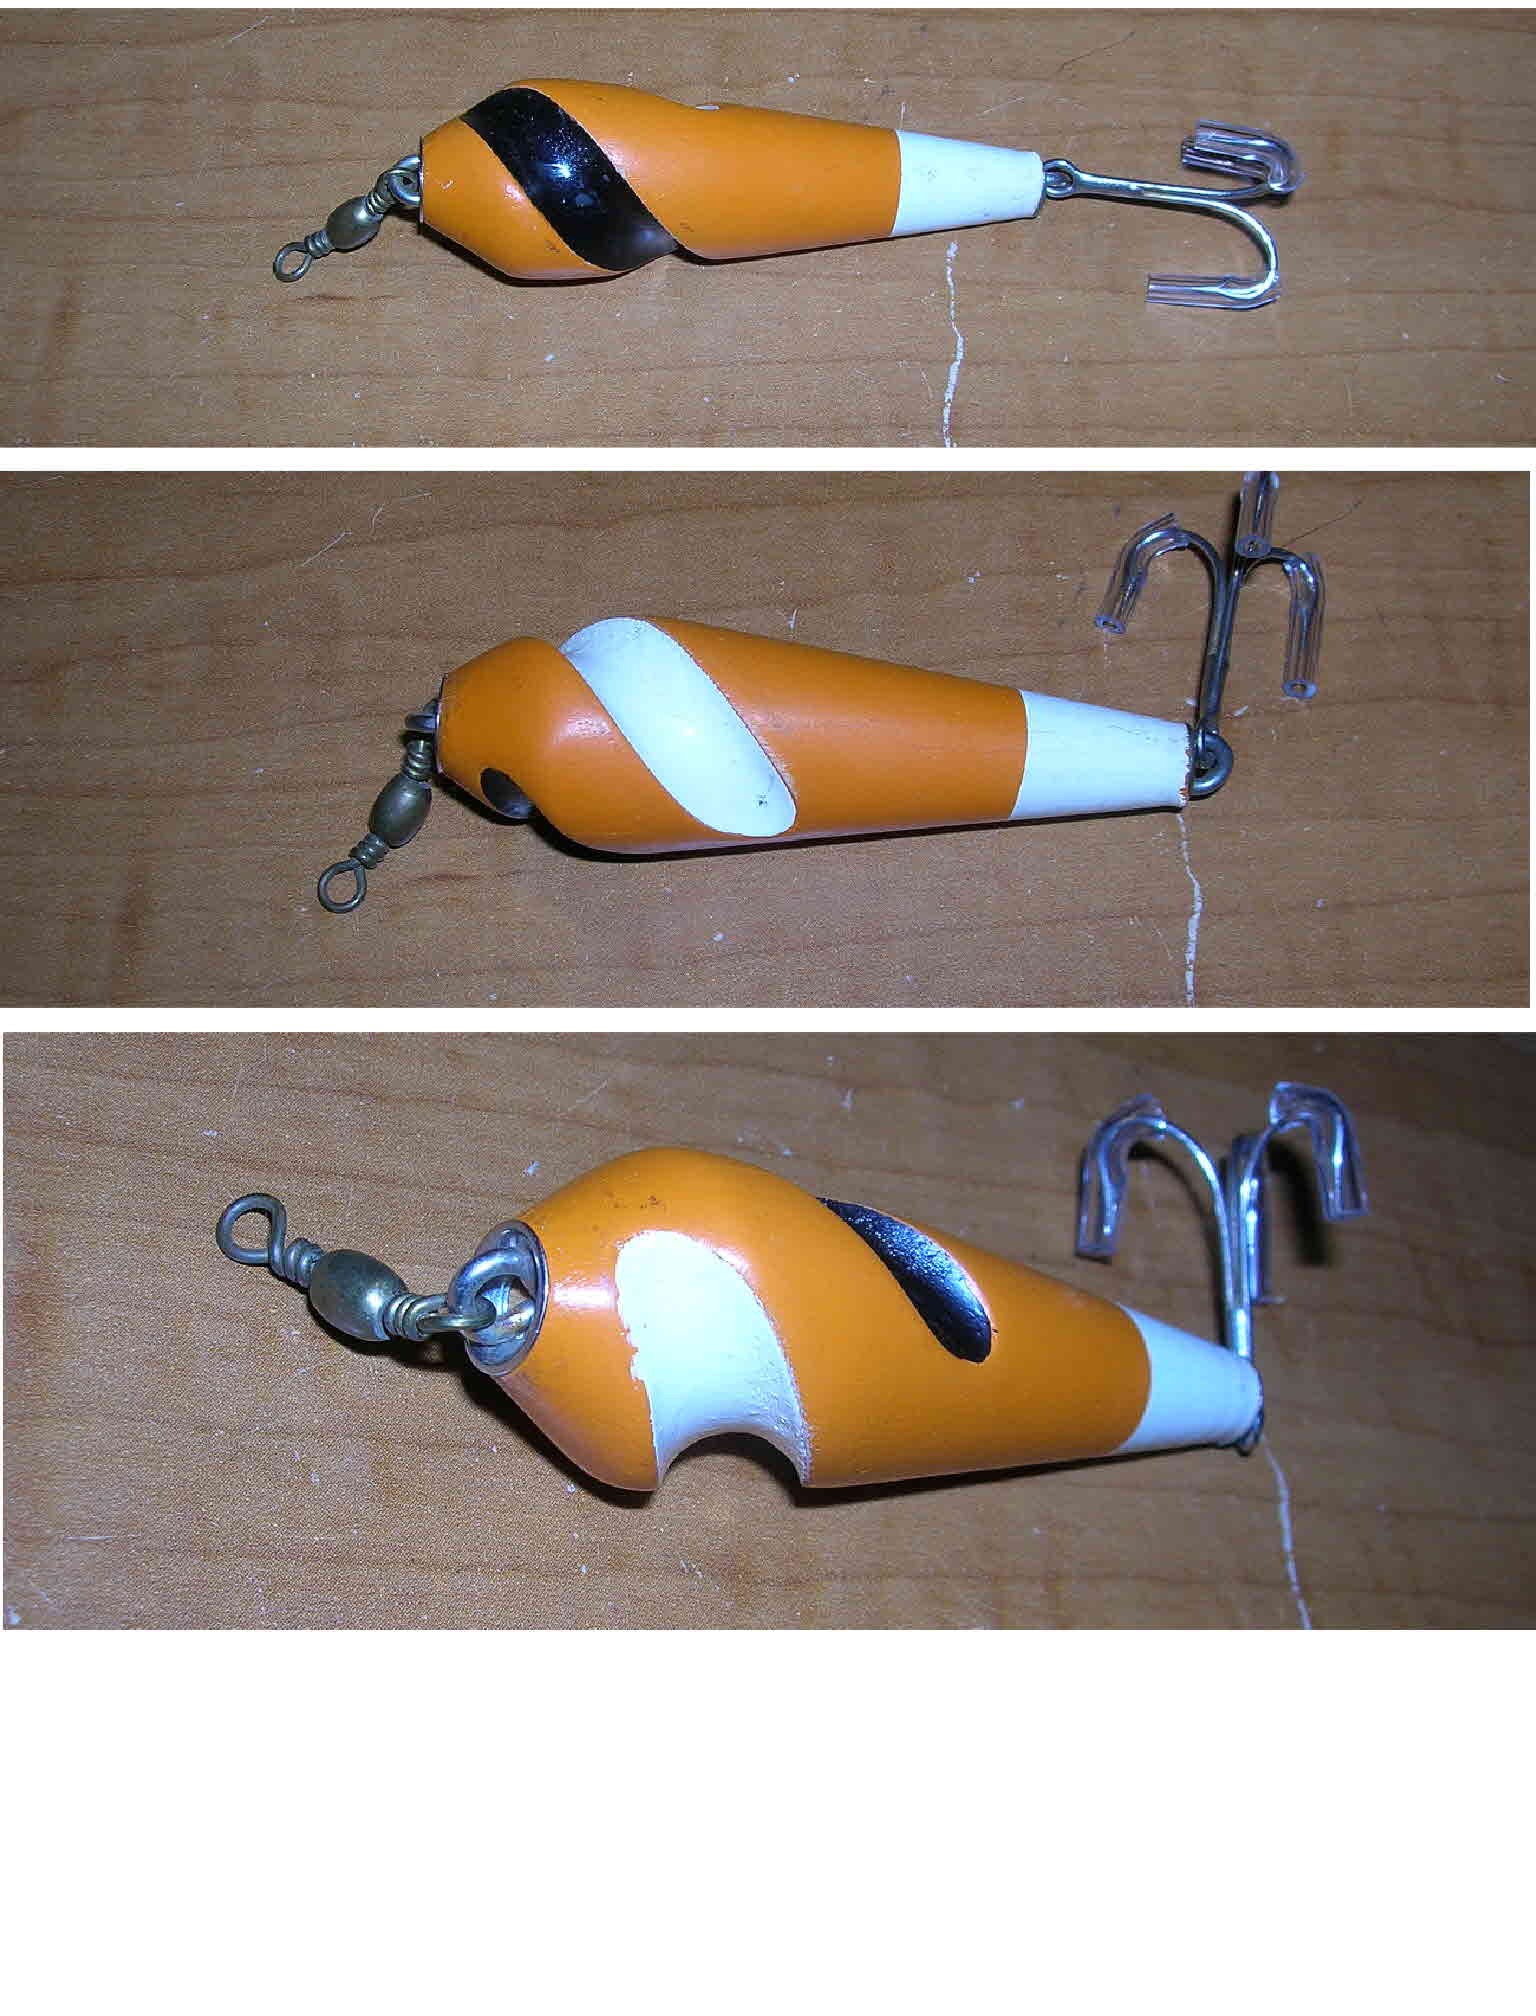 Cotton Cordell Salmon Vintage Fishing Lures for sale